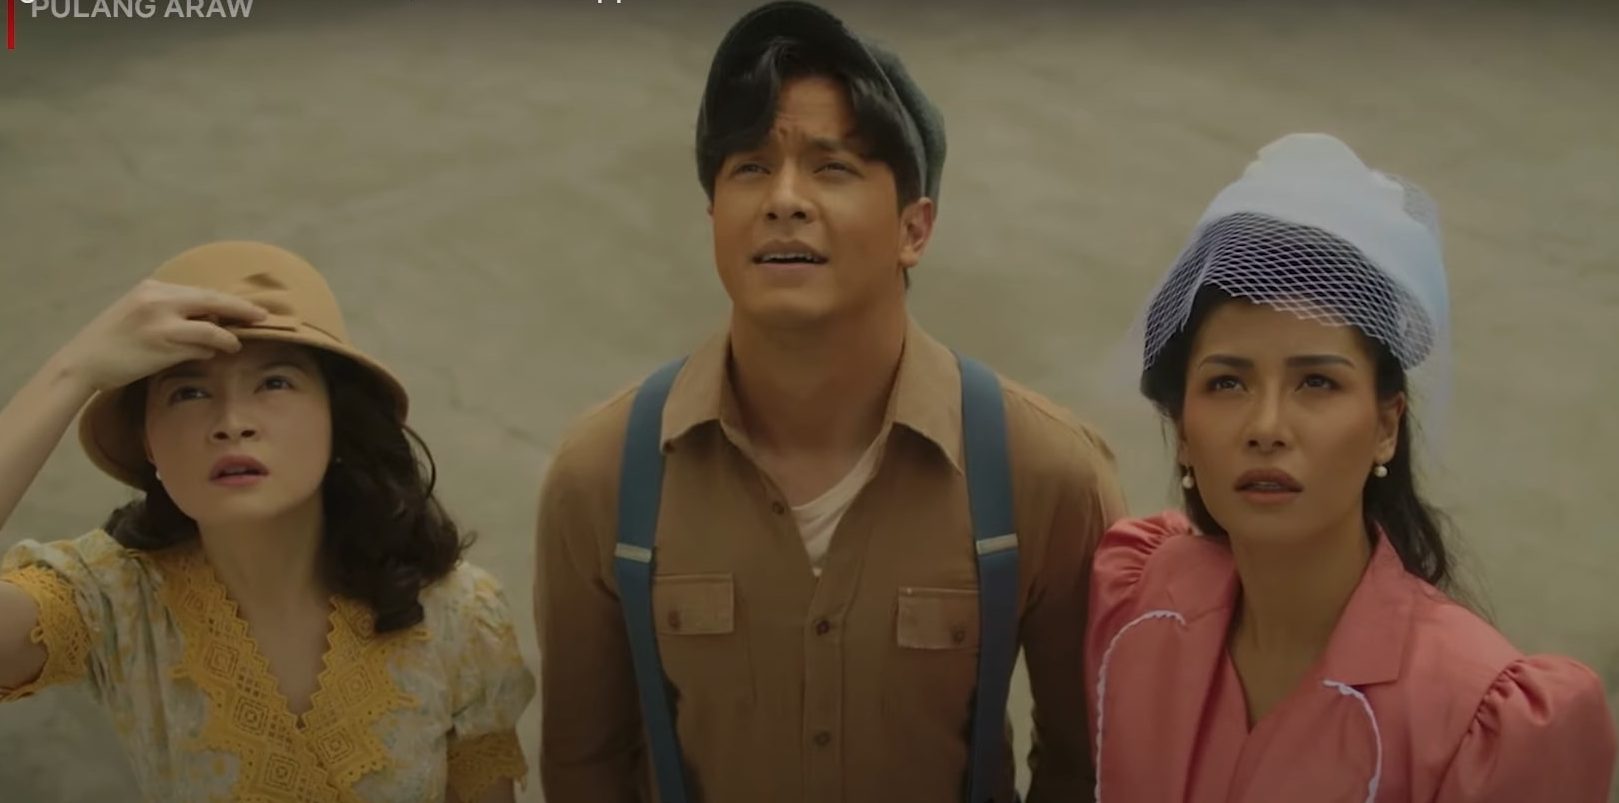 Pulang Araw: Is the Netflix Show Based on a True Story?